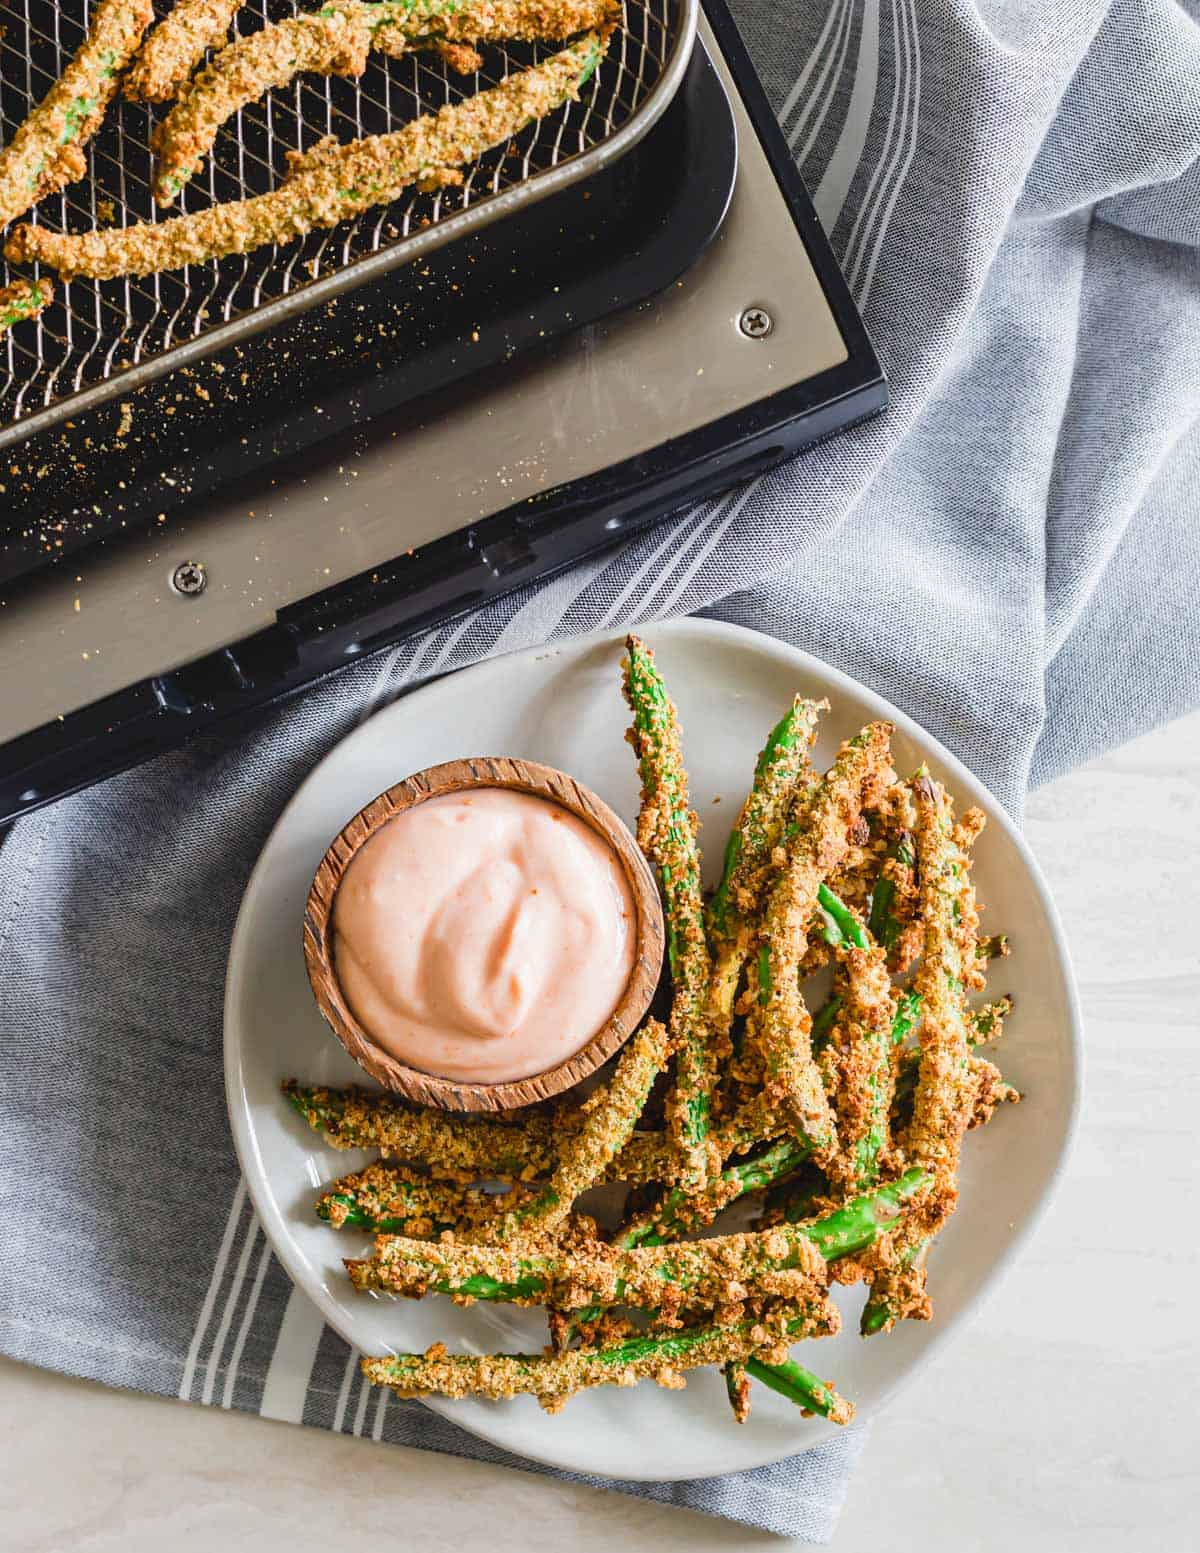 Gluten-free and vegan air fried green bean fries on a plate with dipping sauce and an air fryer in the background.